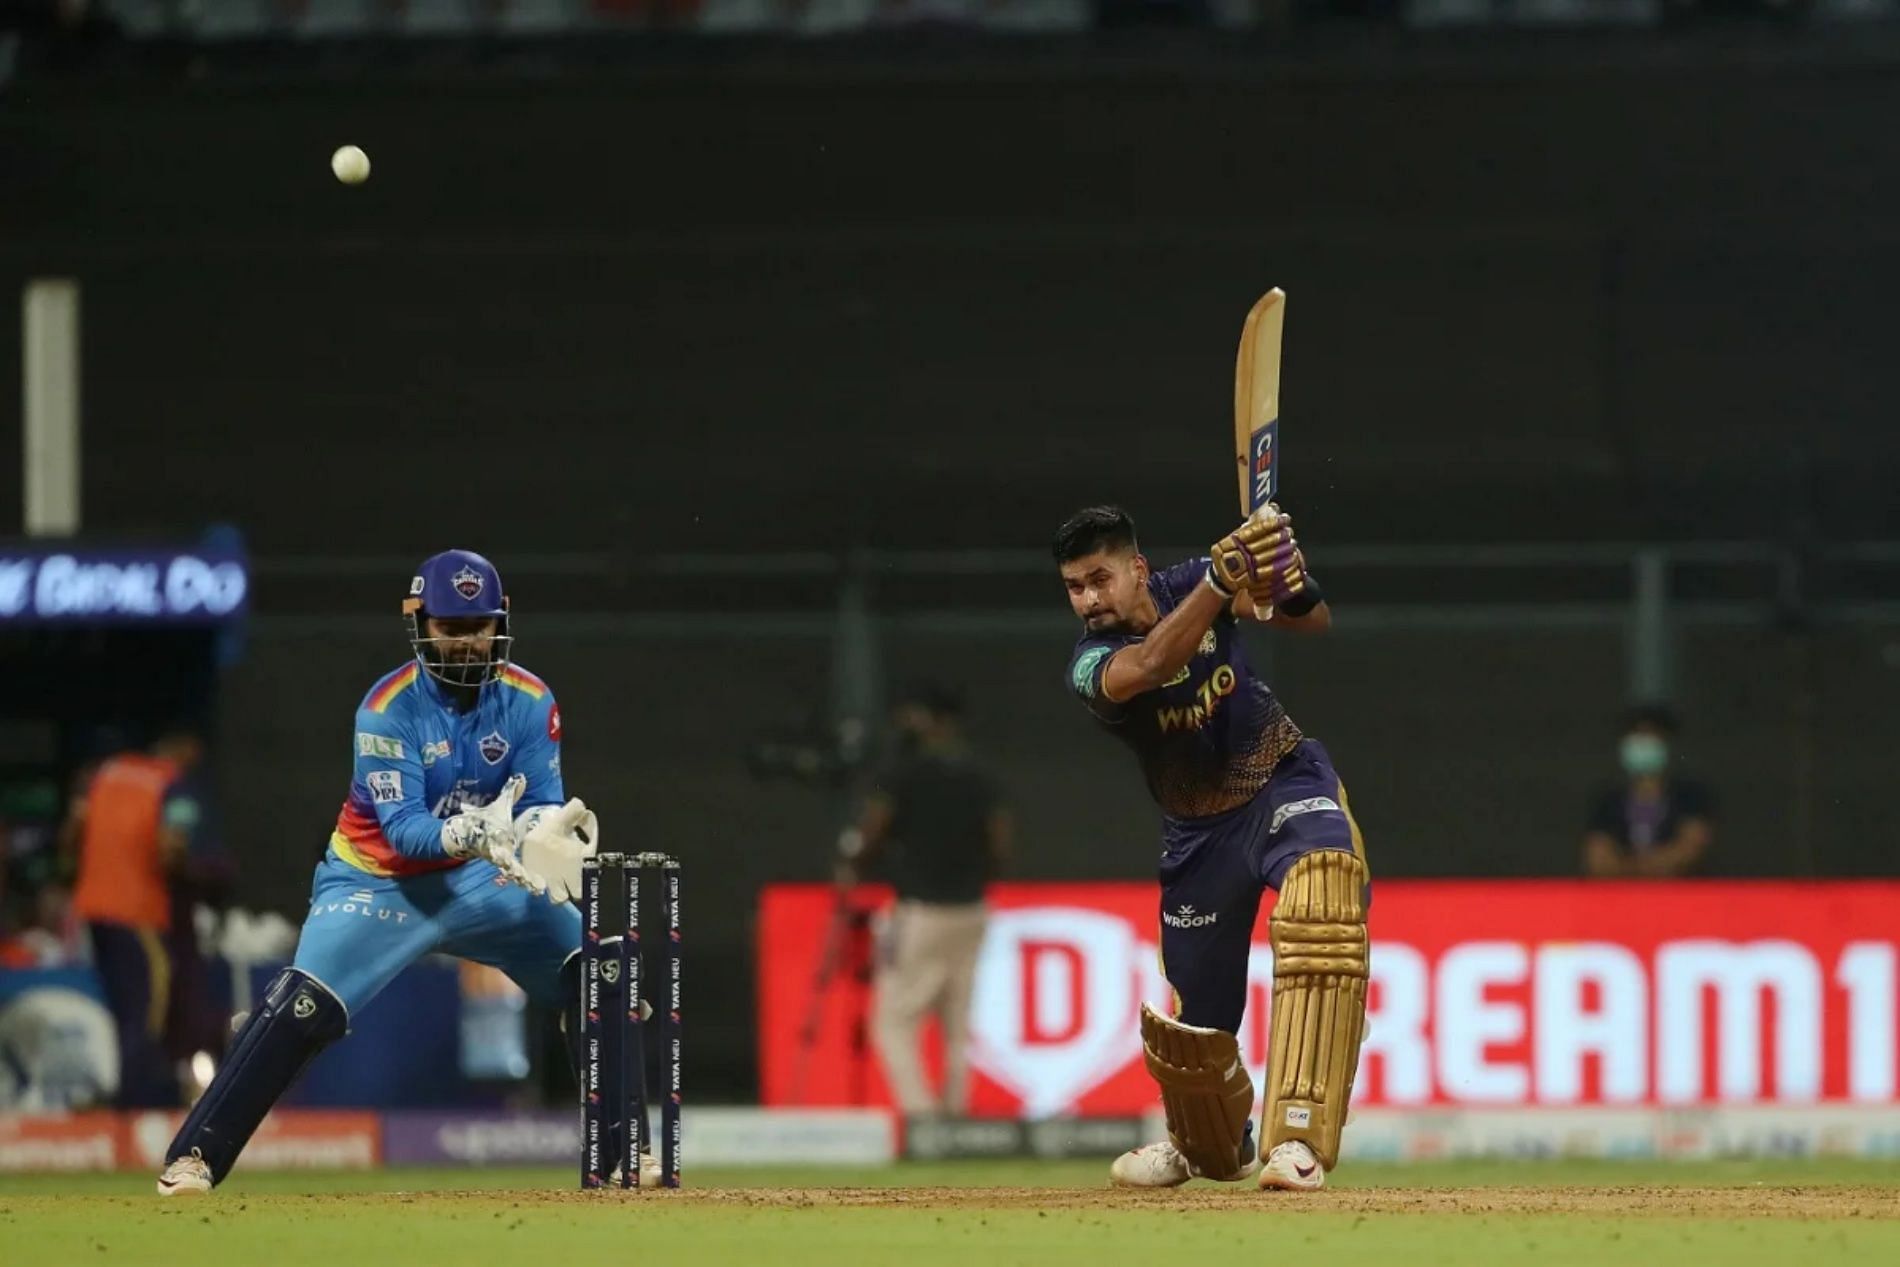 Shreyas Iyer was inconsistent with the willow